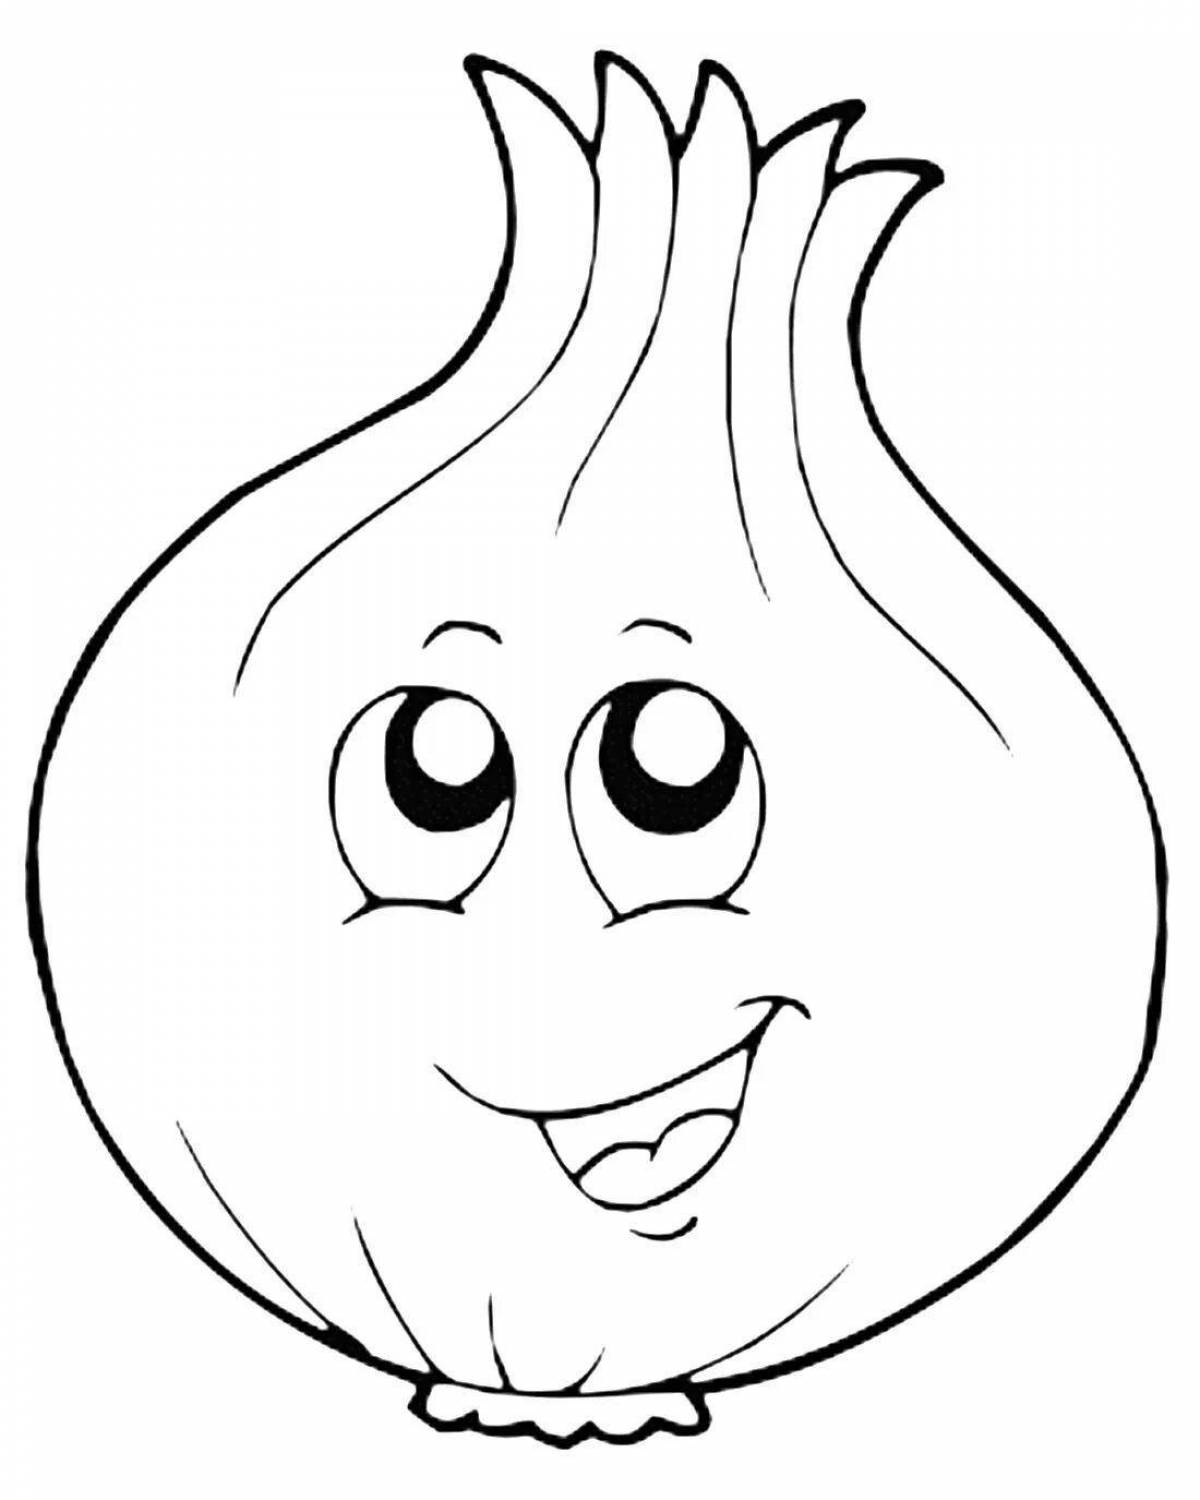 Colorful green onion coloring page